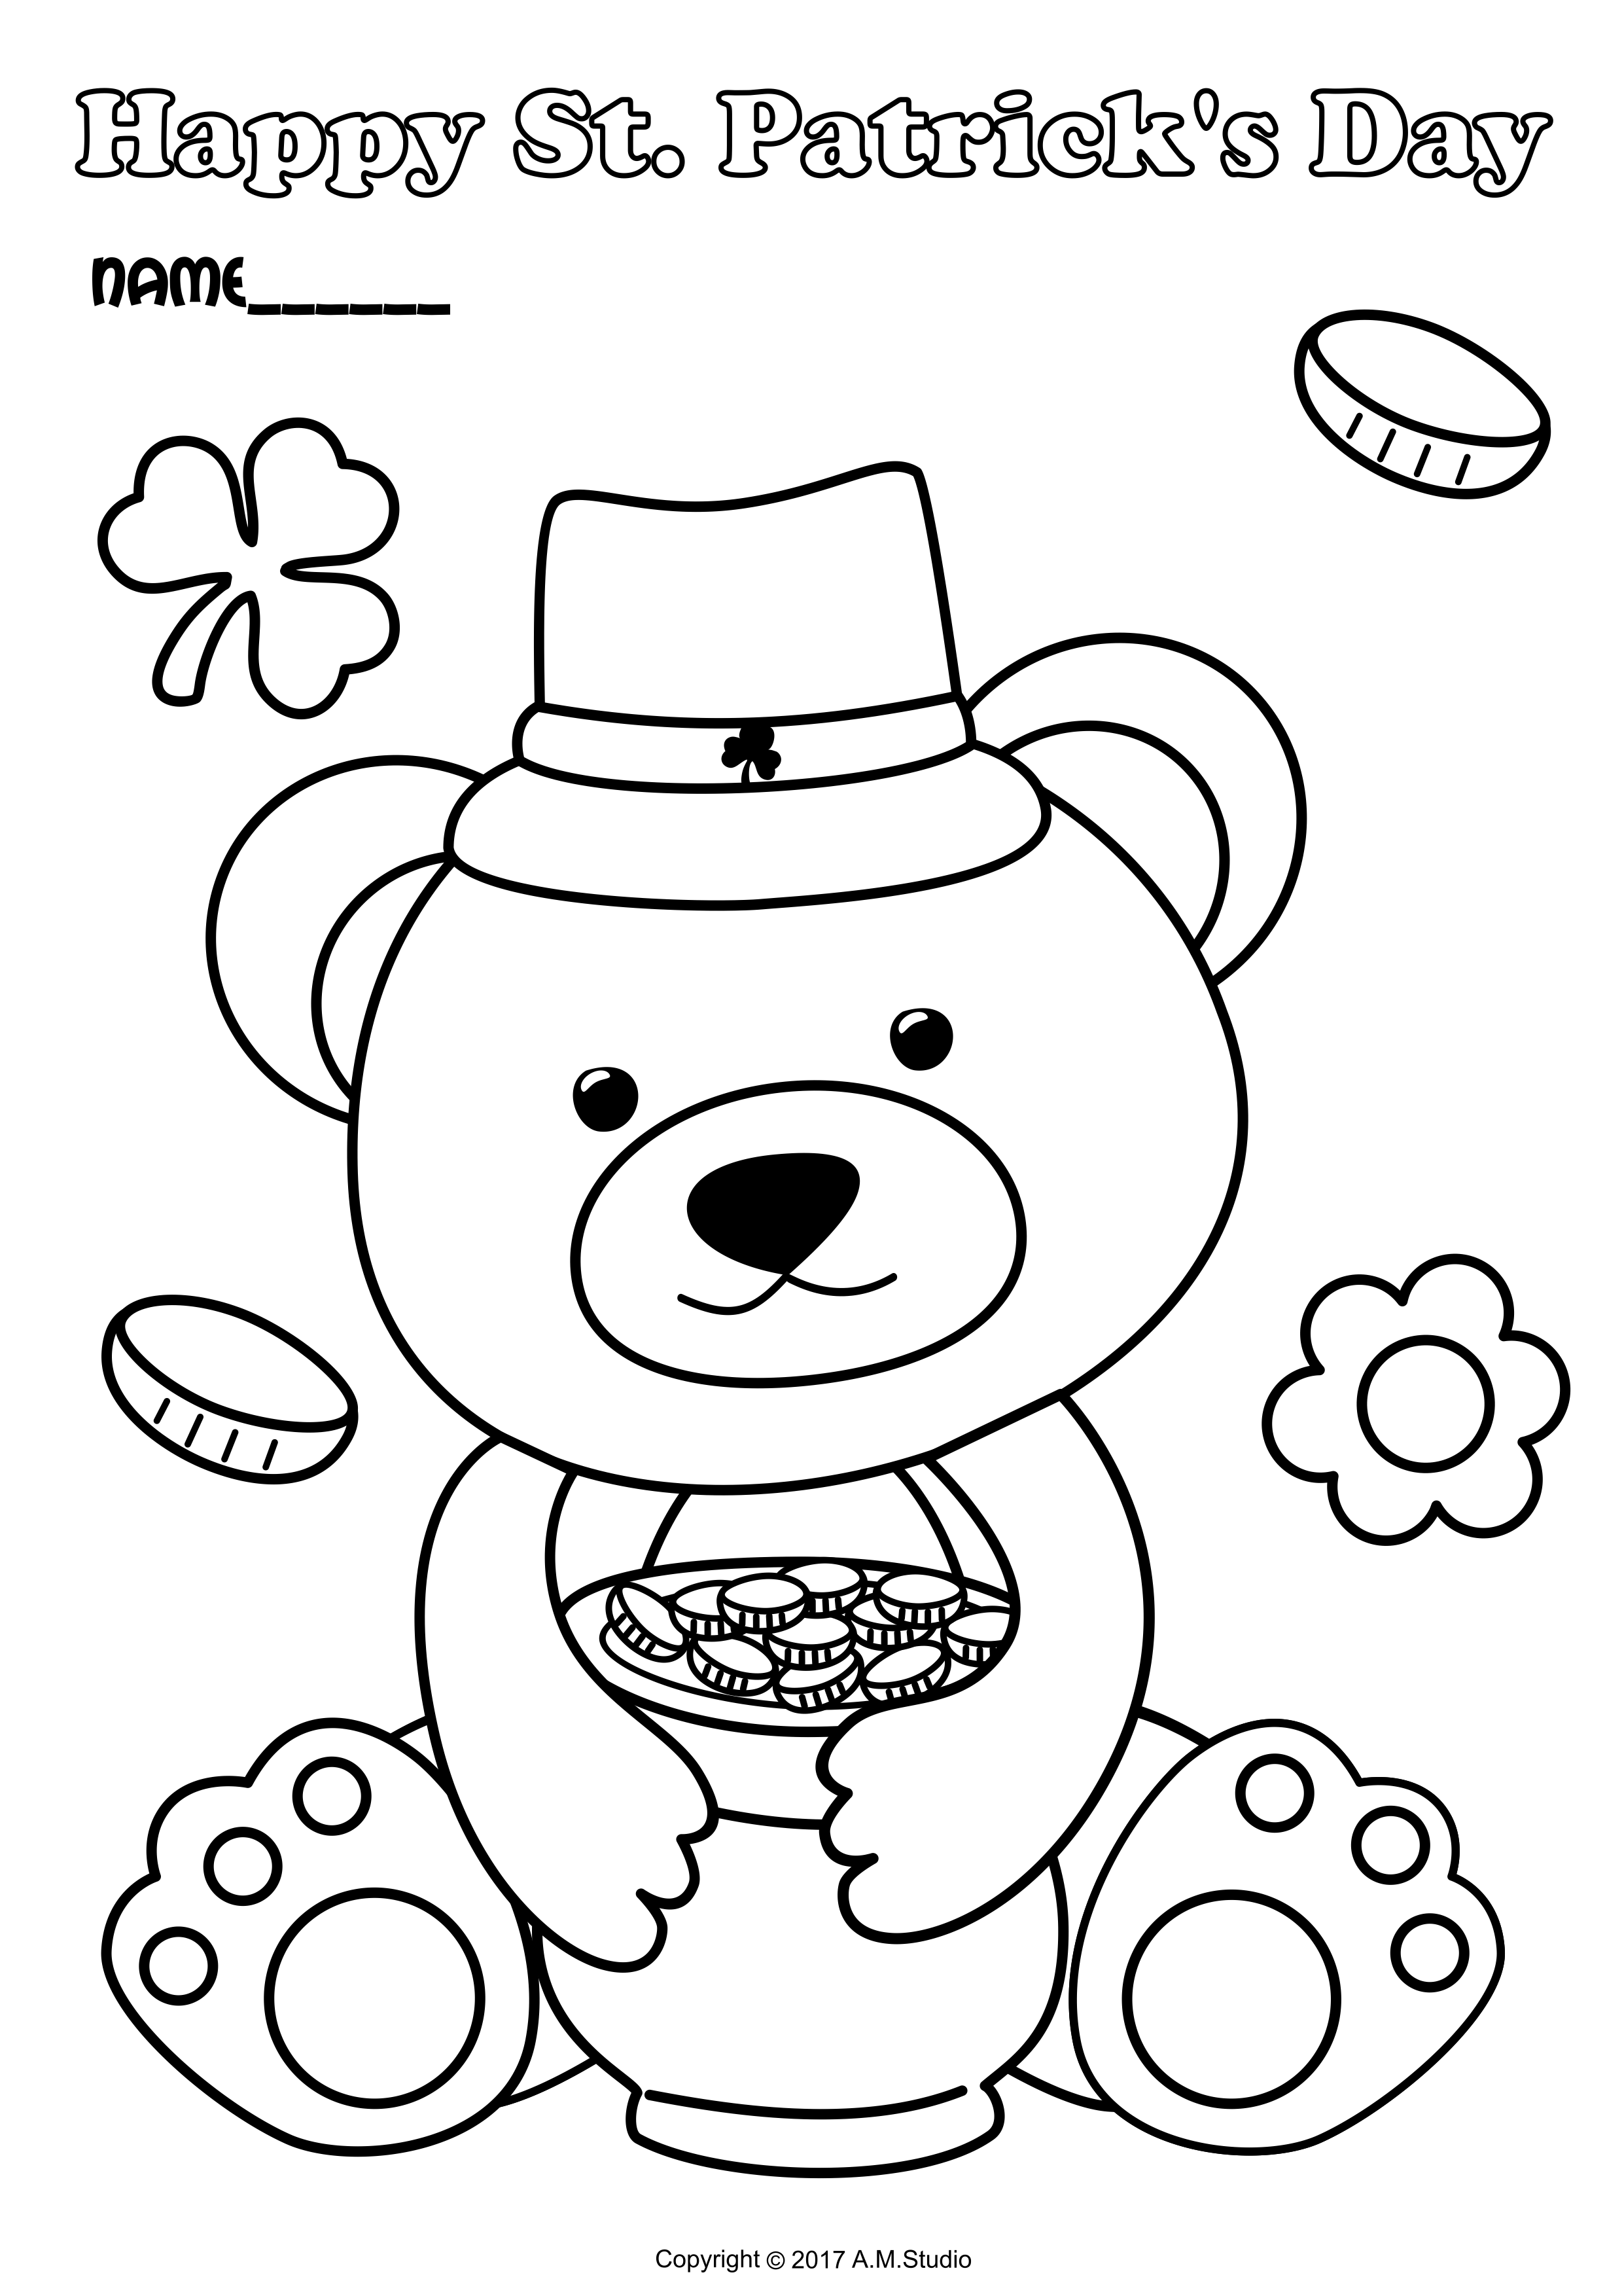 St. Patrick`s Day Printable Coloring Pages for Kids (img # 3)